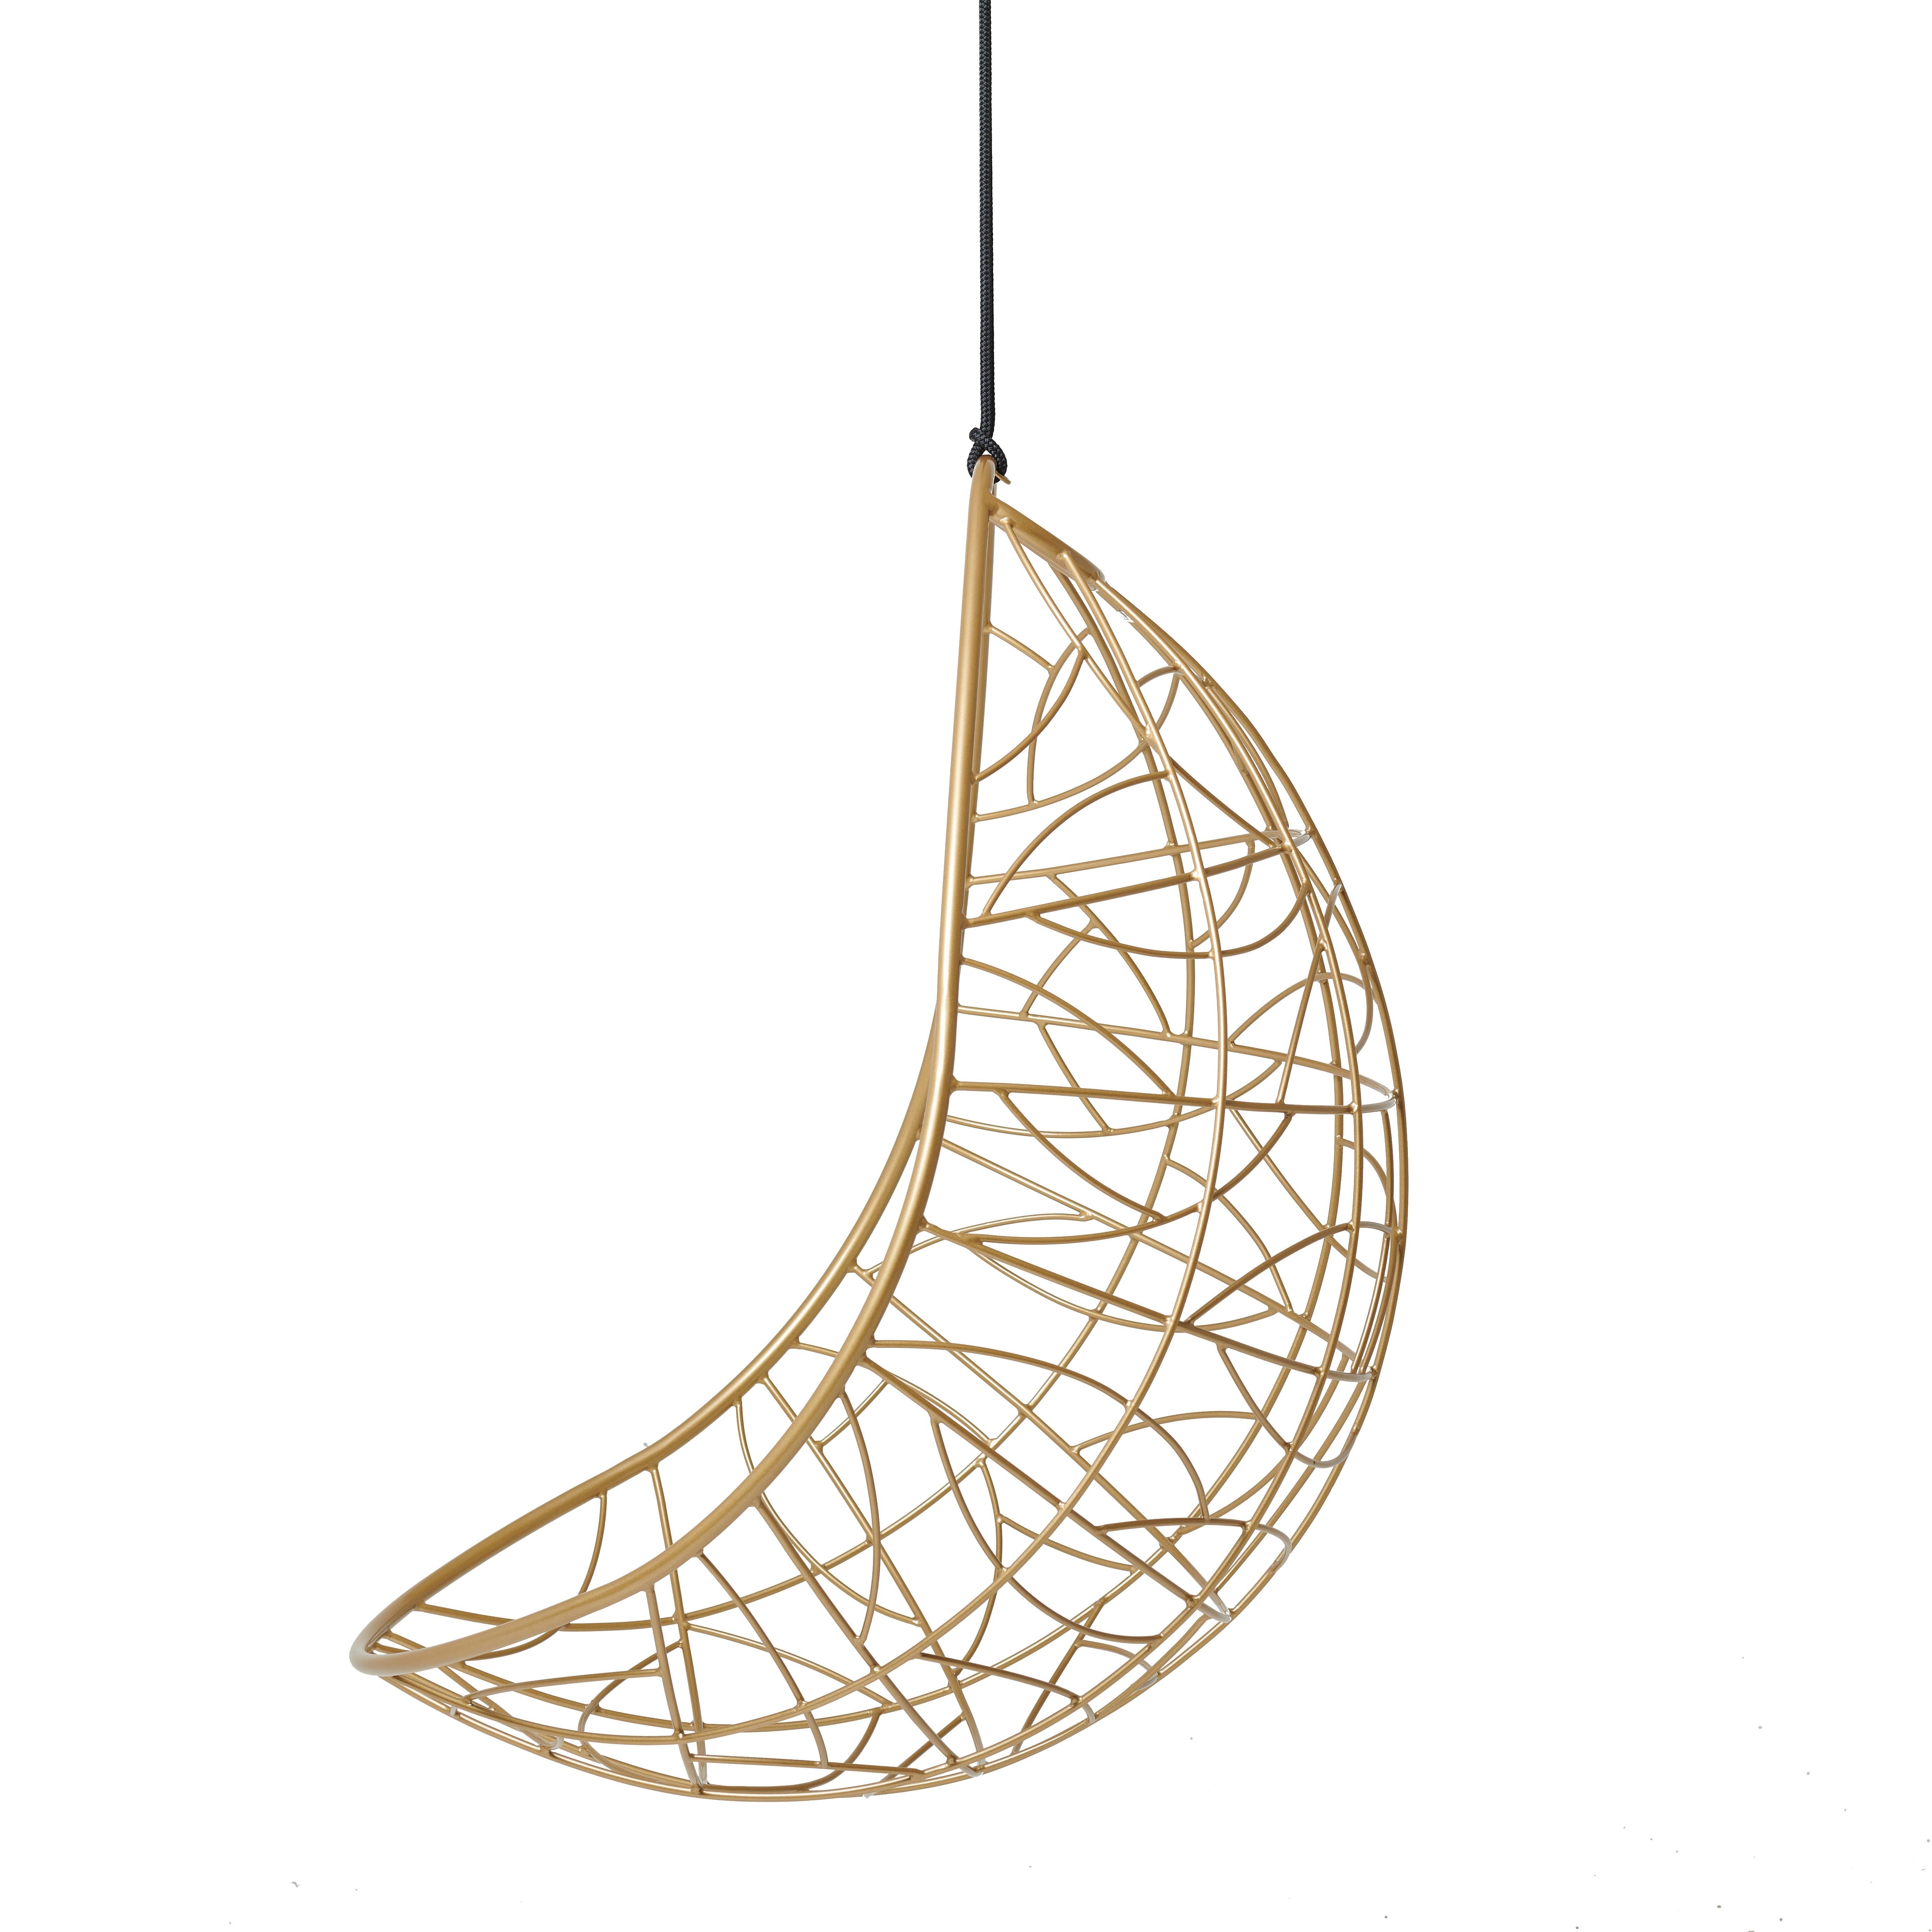 The nest egg hanging swing chair is inspired from the organic forms in bird nests and has a natural egg shape. The pattern detail is reminiscent of tree branches that intersect, grasses that are intertwined, the veins in dragonfly wings, veins in